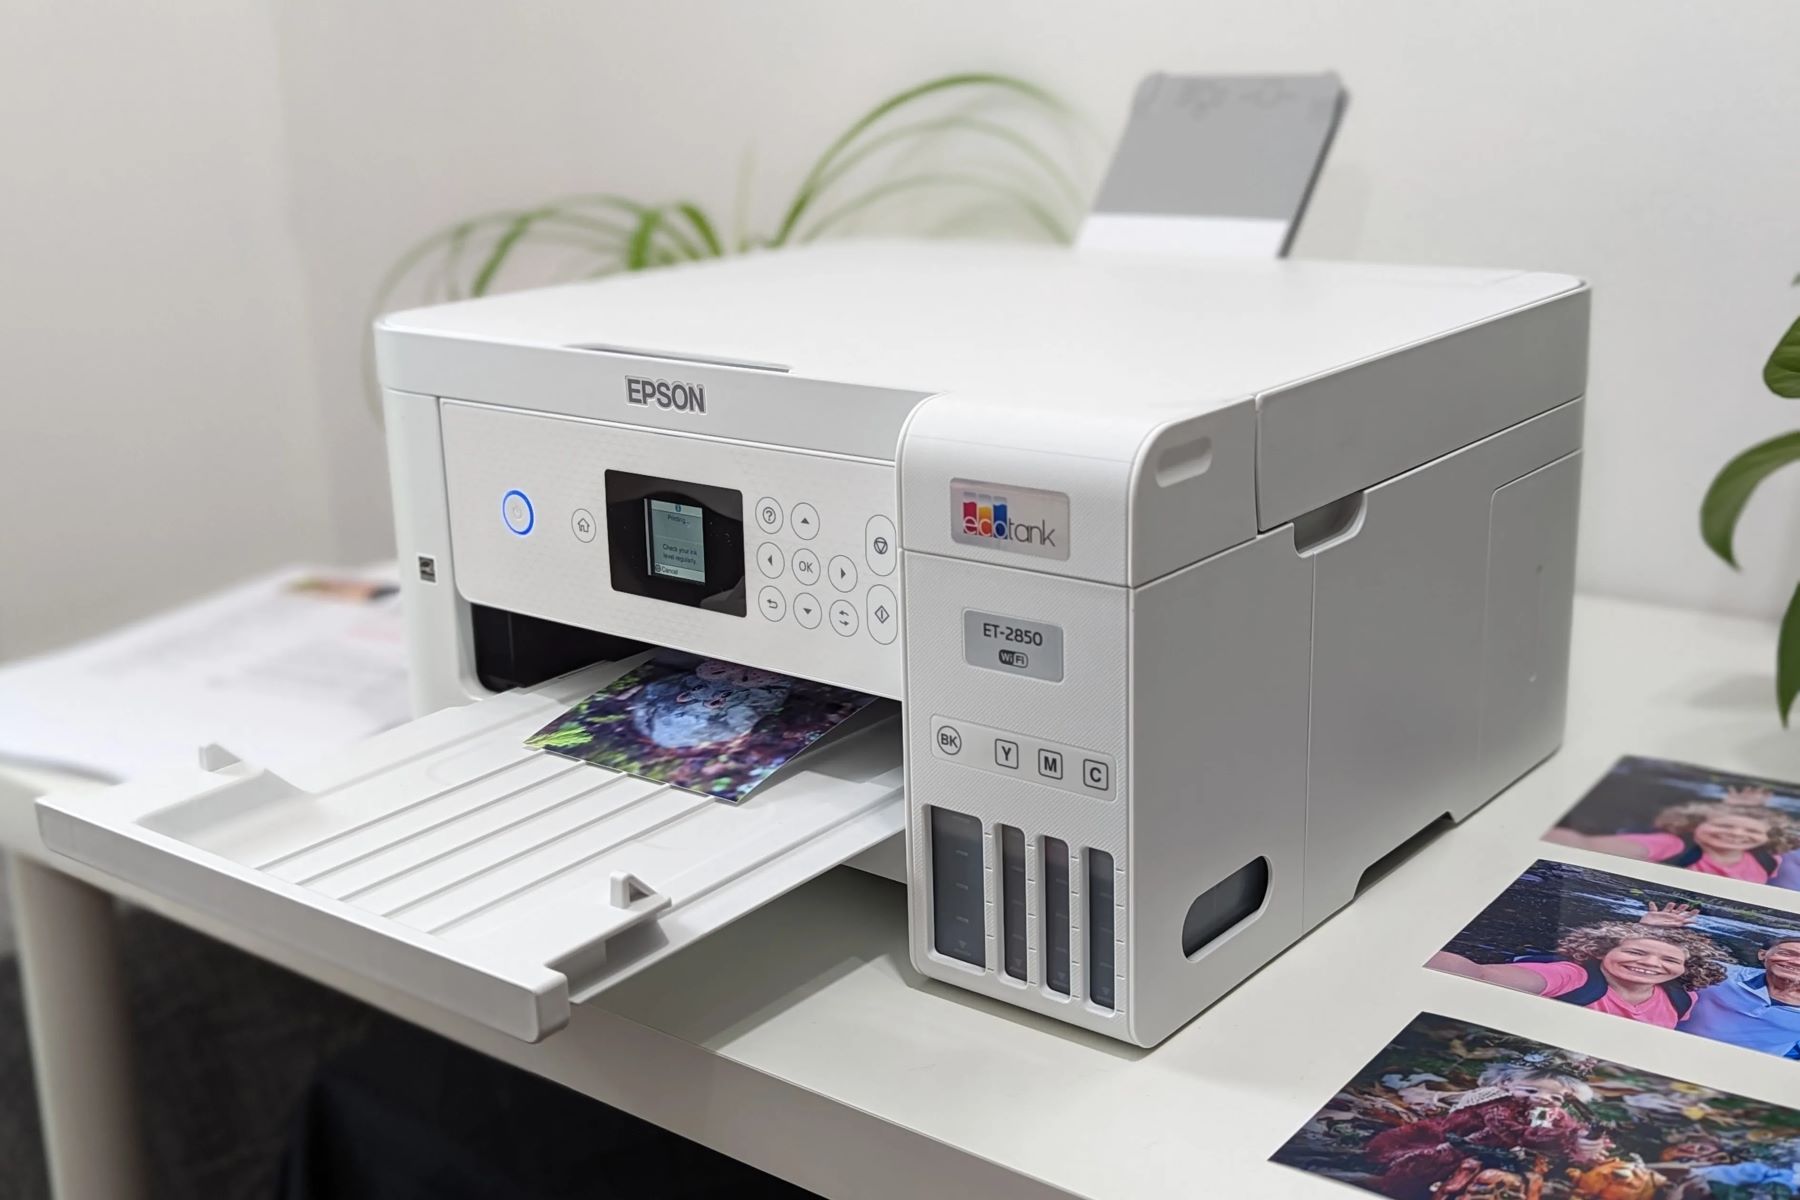 How To Connect Epson Printer To IPhone